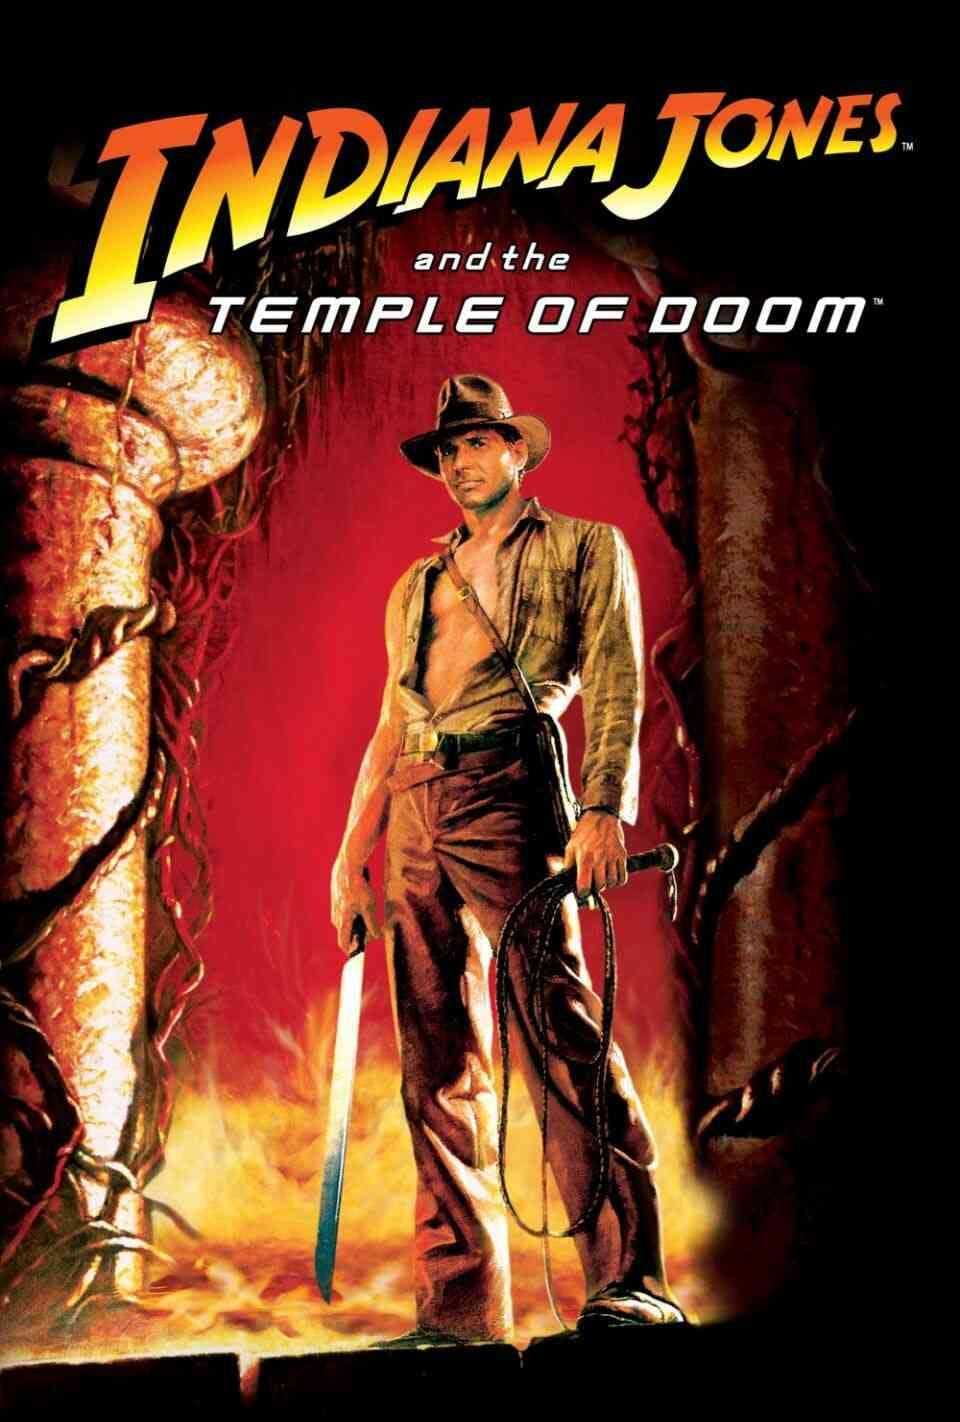 Read Indiana Jones and the Temple of Doom screenplay (poster)